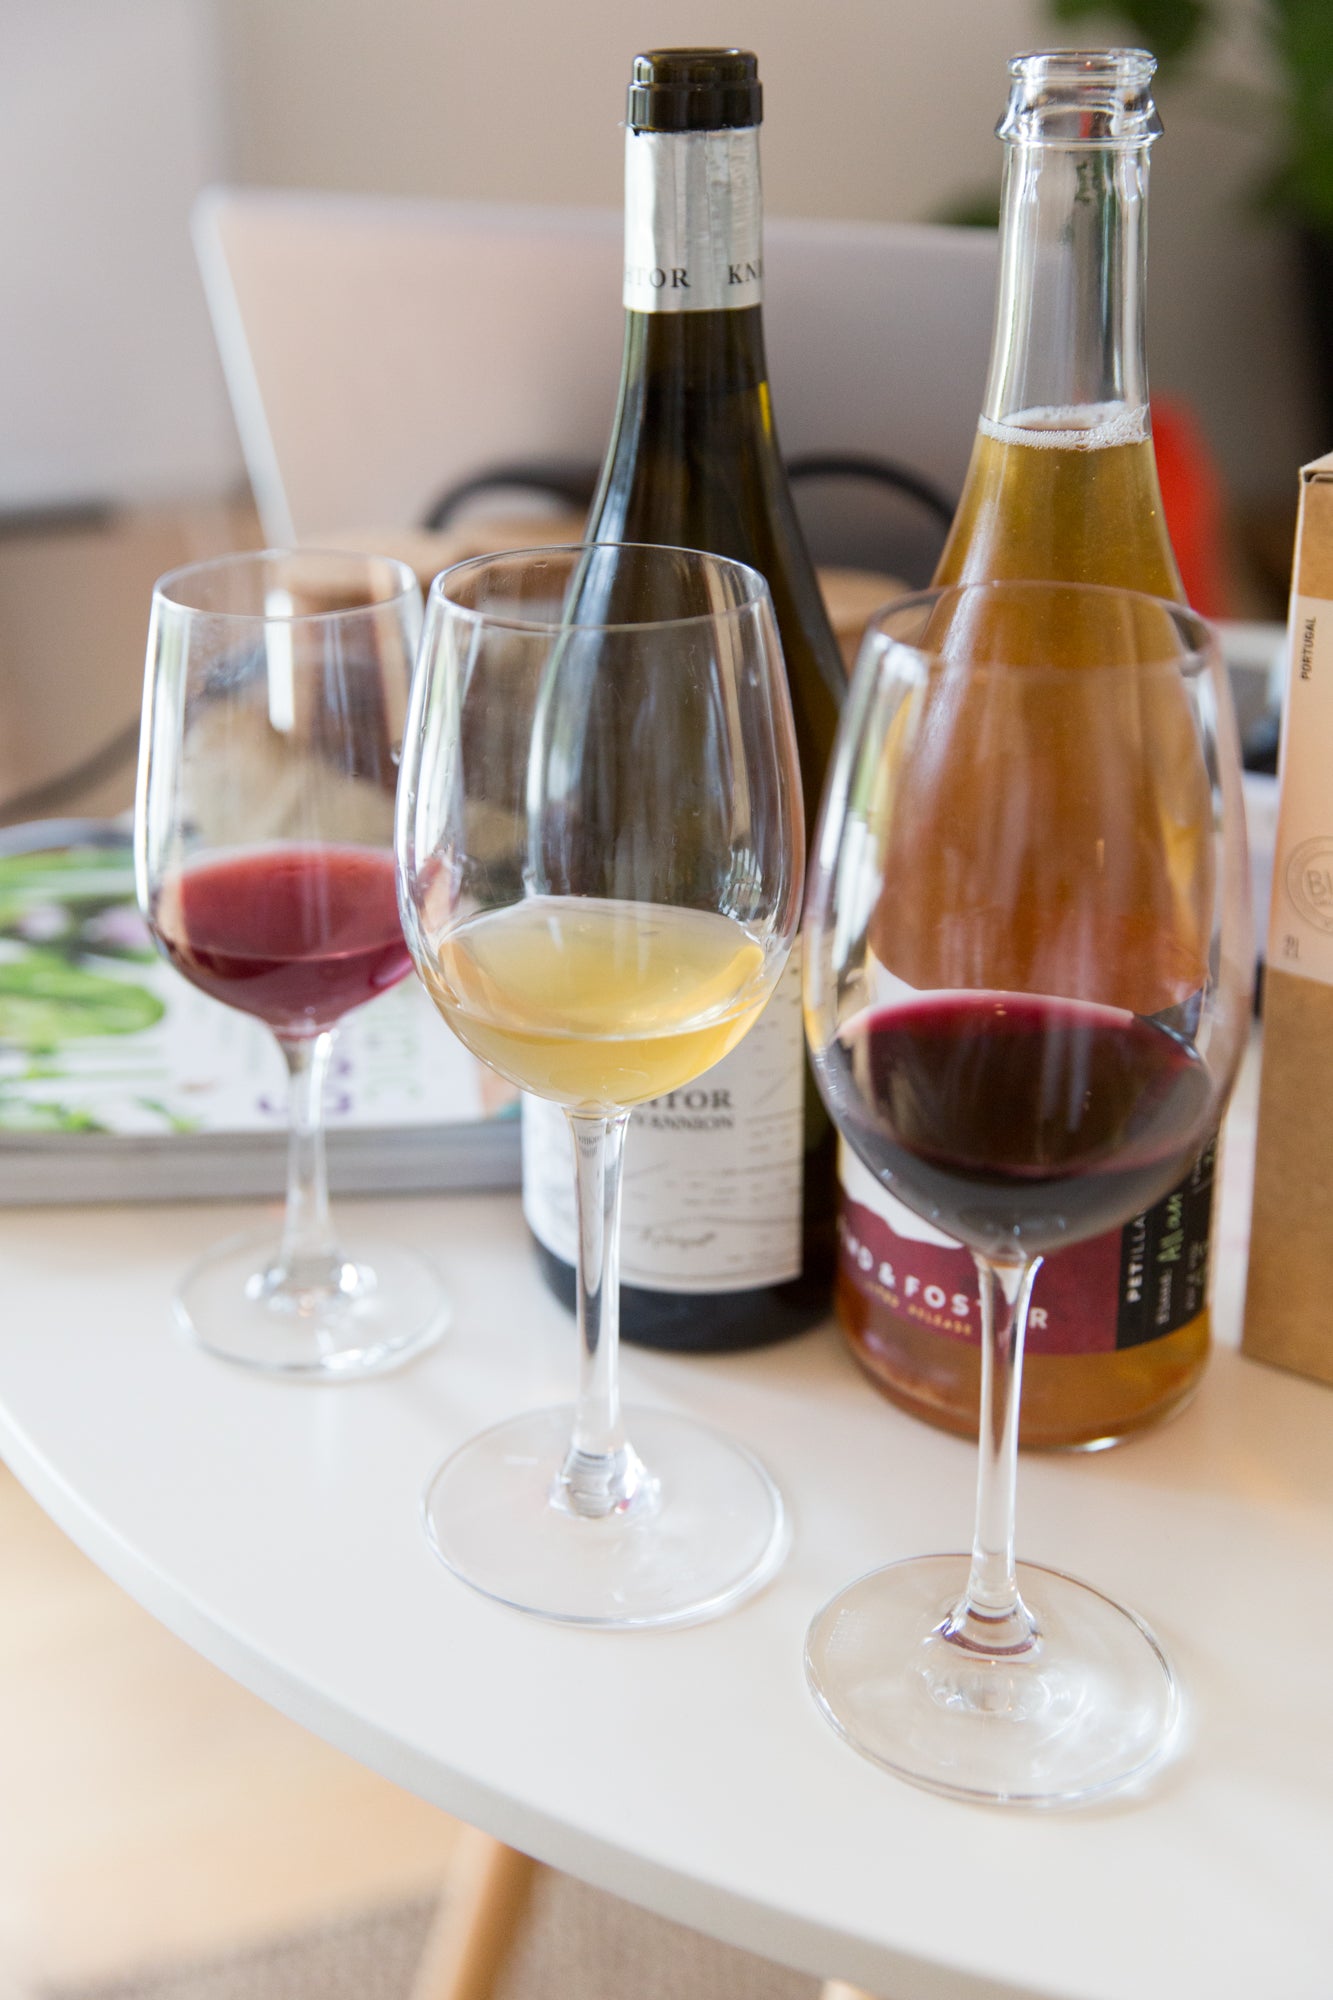 Three glasses of natural wine and two bottles of wine